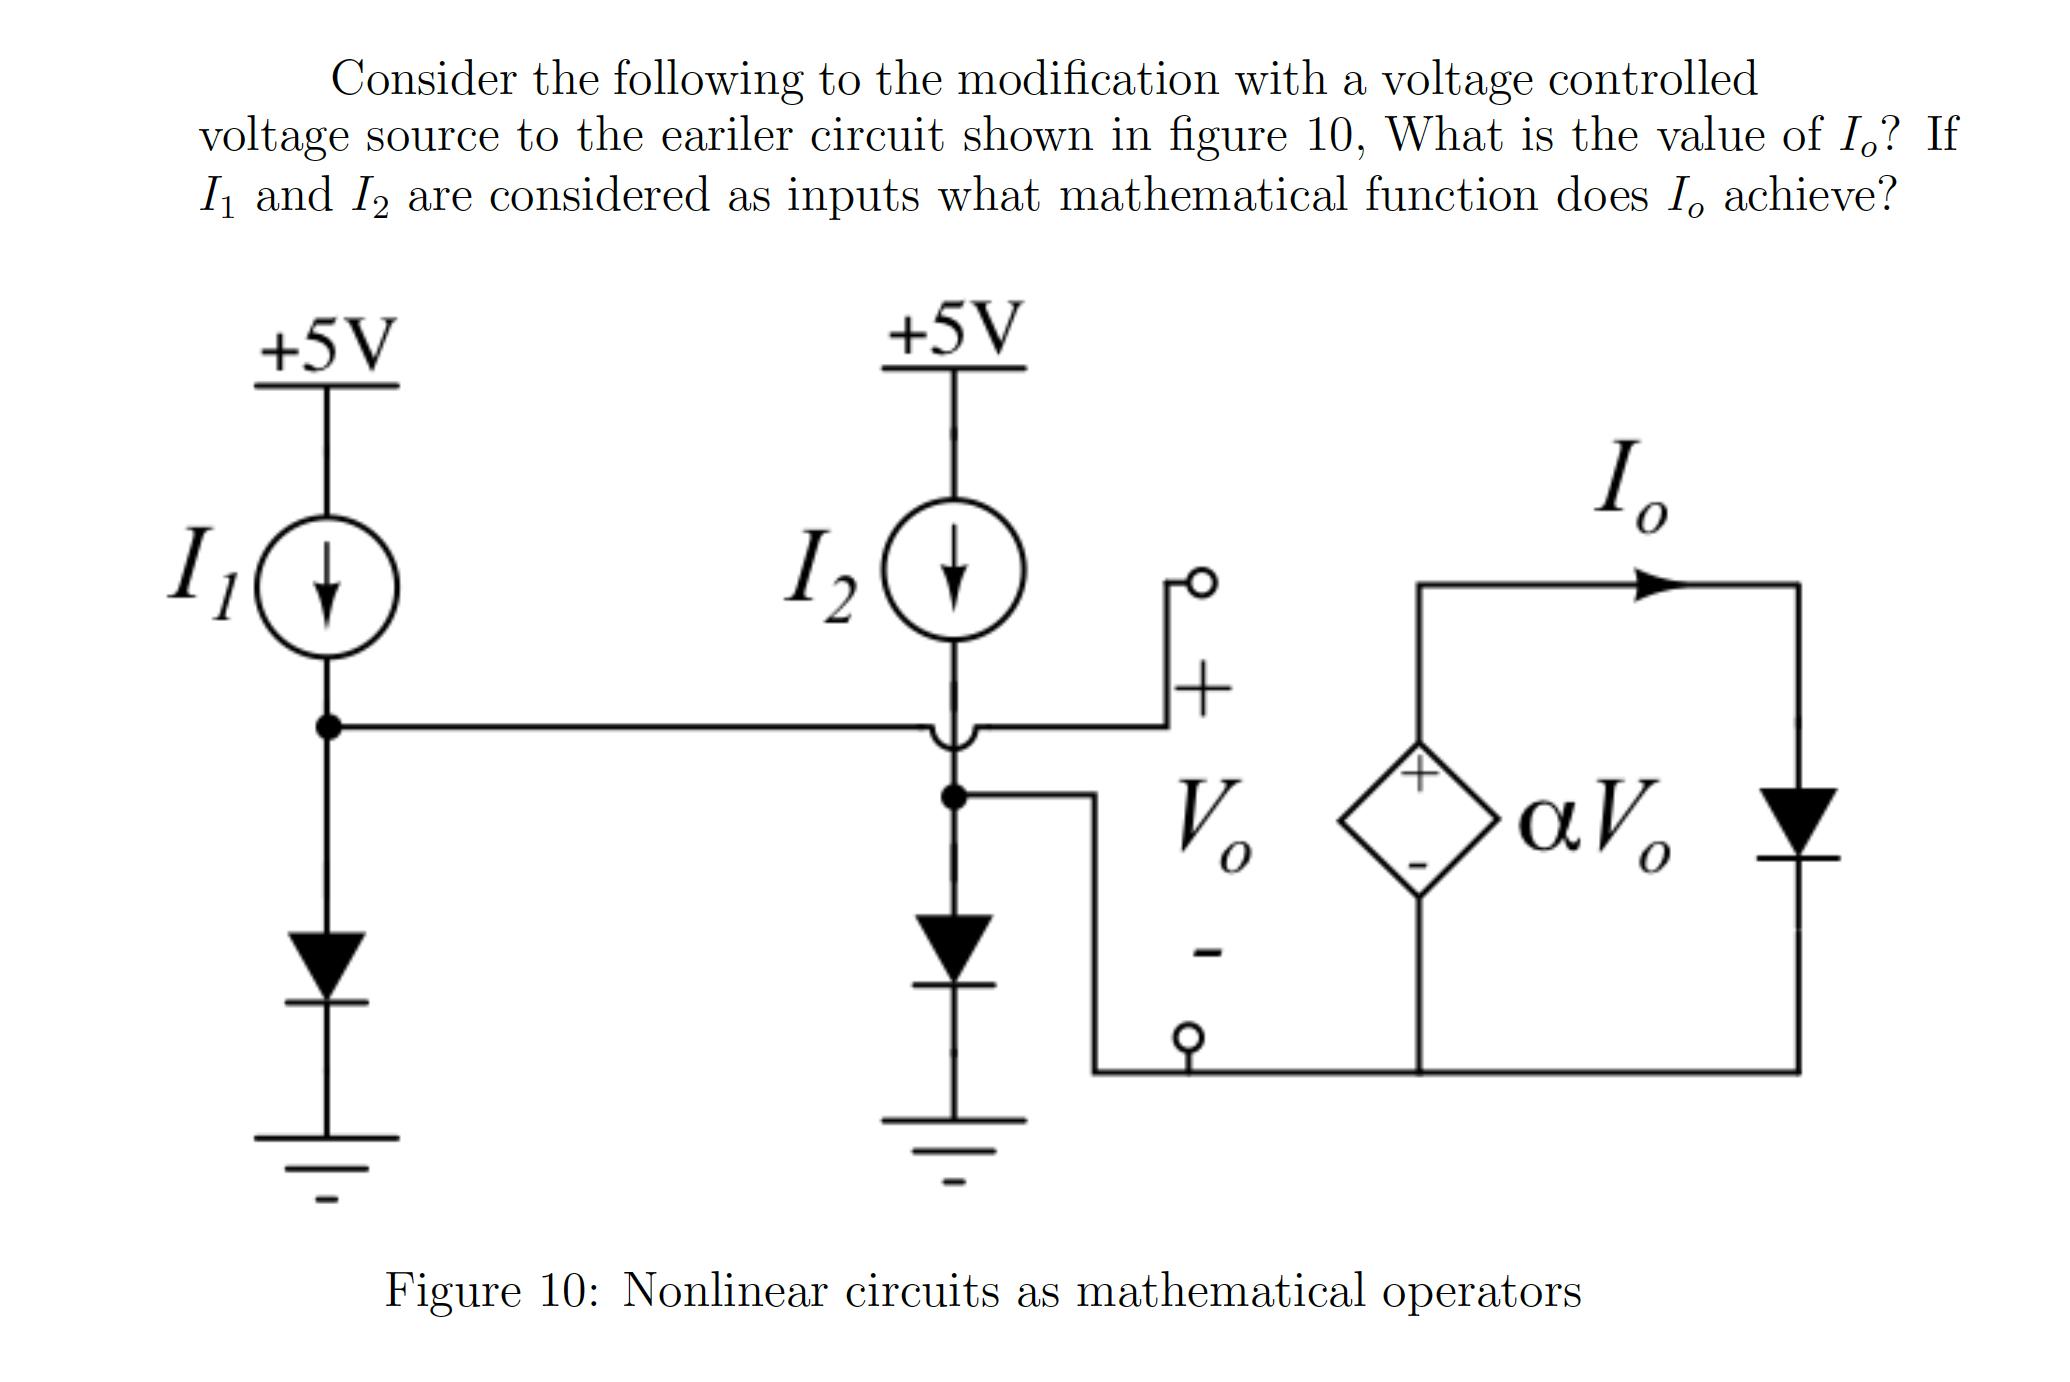 Consider the following to the modification with a voltage controlled voltage source to the eariler circuit